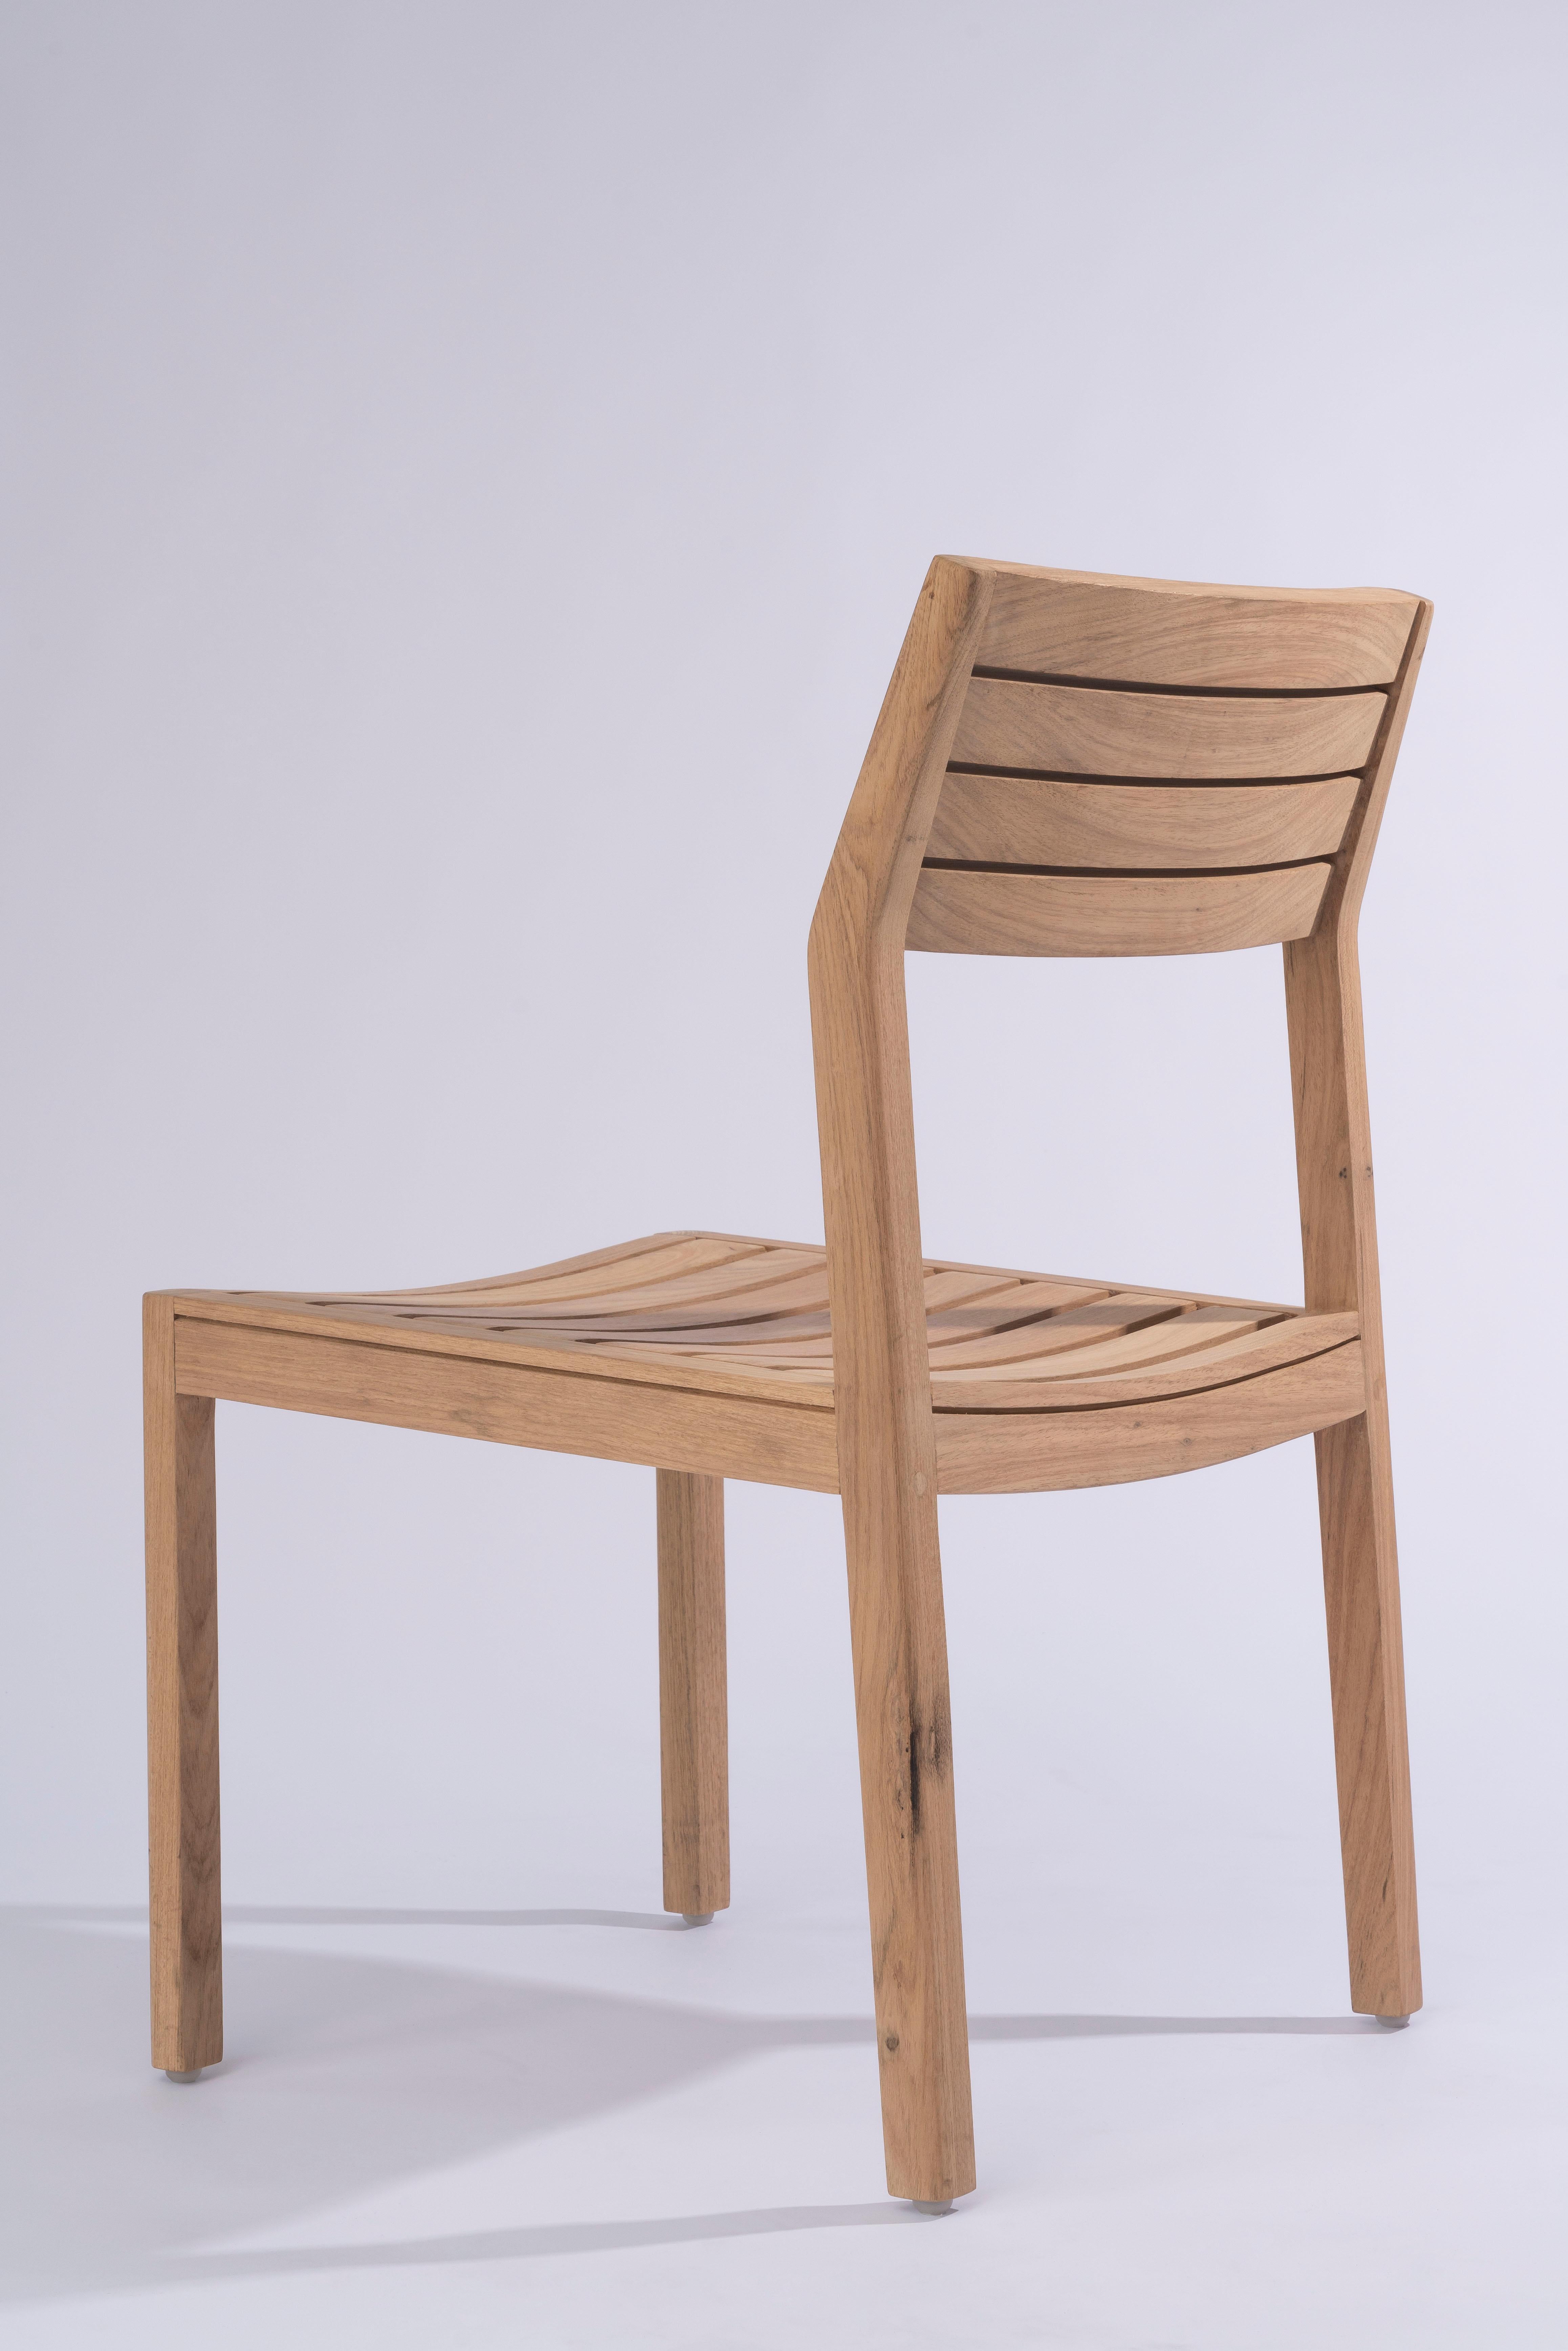 Solid Wood Arms Chair with Wooden Slats, for the Outside, Outdoor Resistant For Sale 3